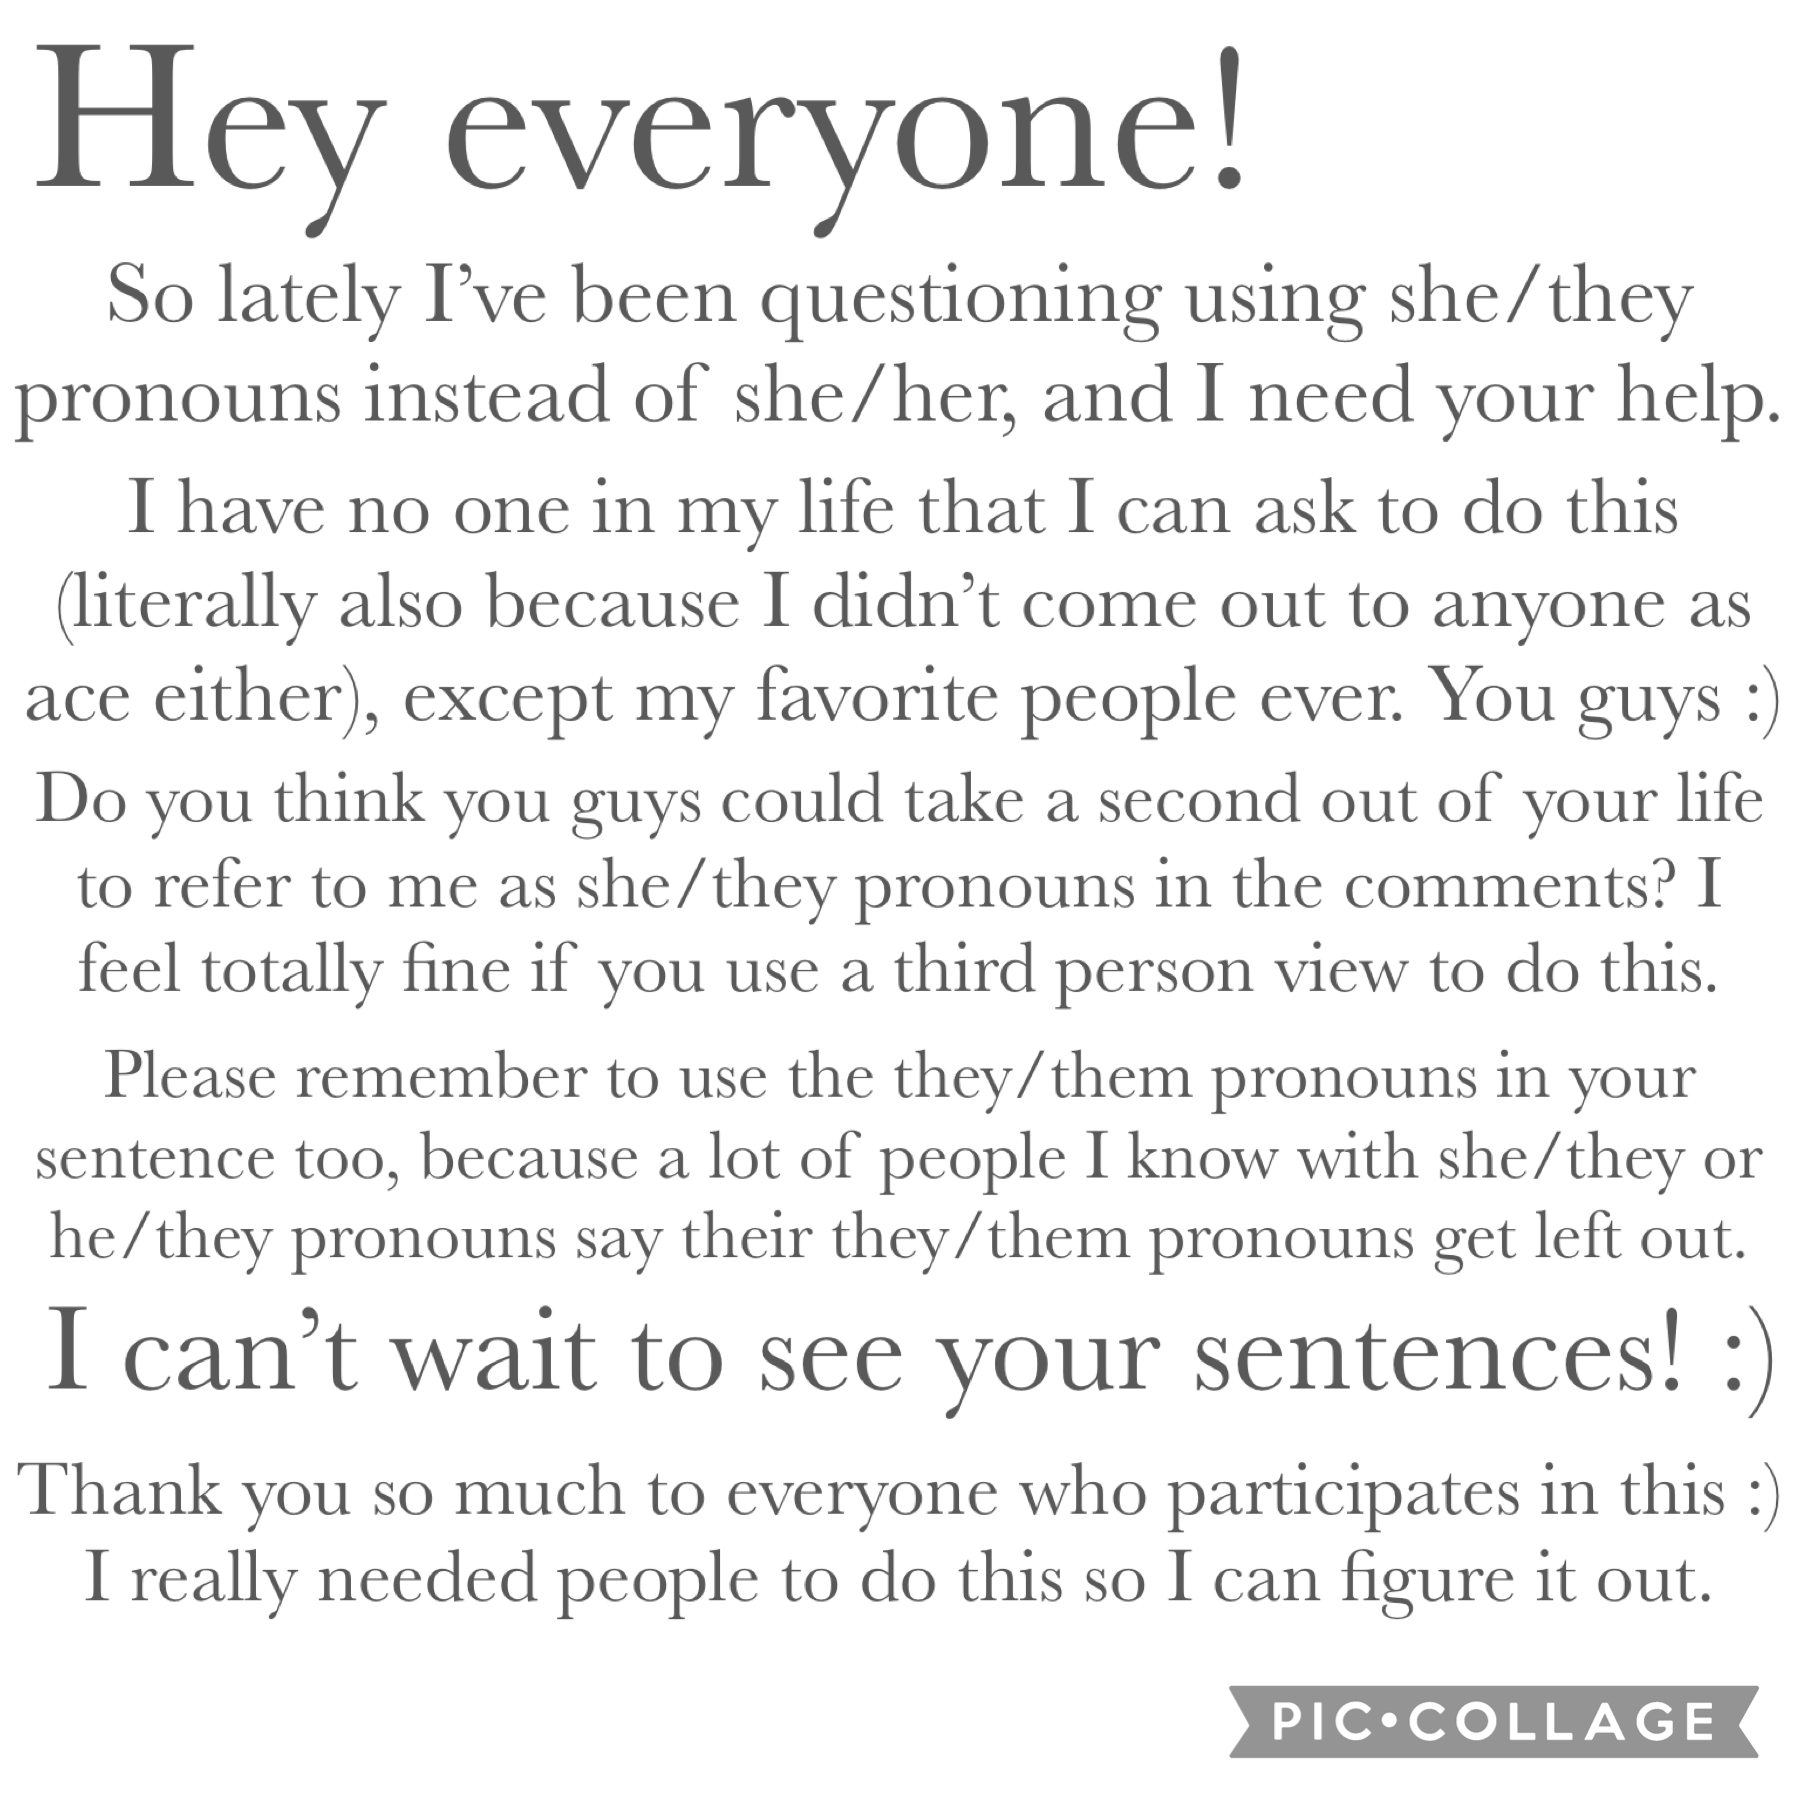 What are your pronouns? Feel free to add that to your comment!